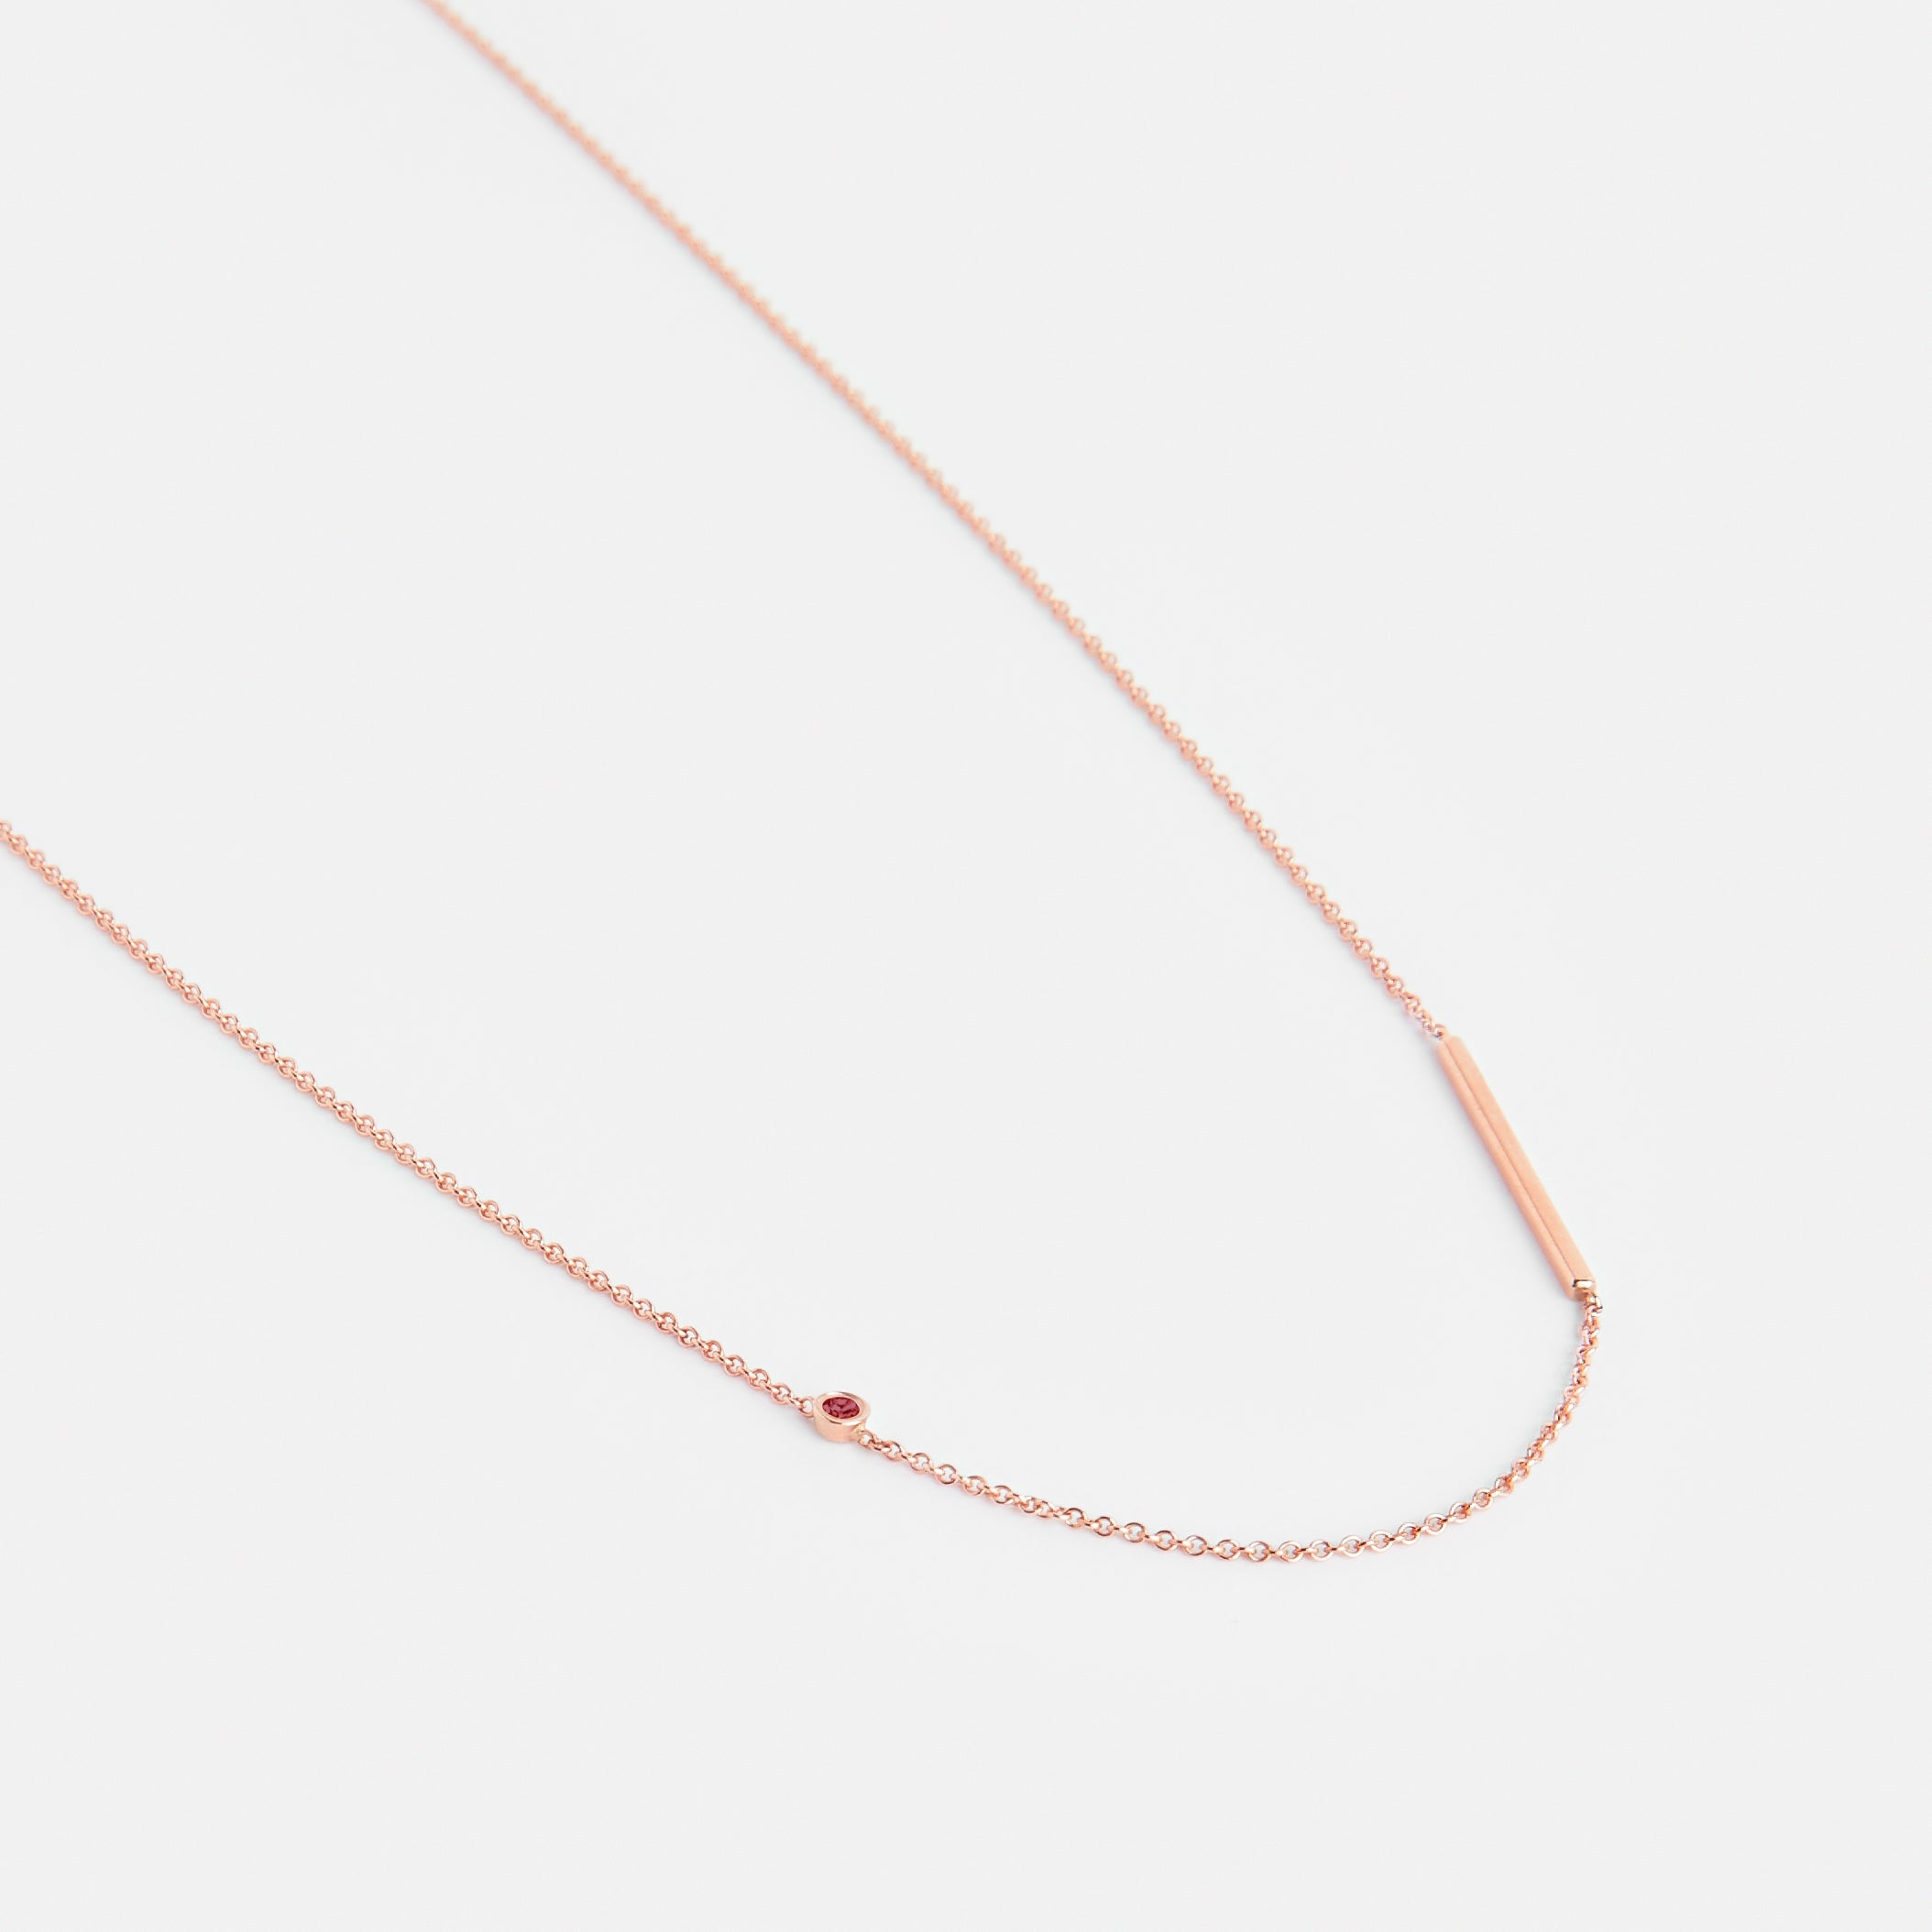 Iki Thin Necklace in 14k Gold set with Ruby By SHW Fine Jewelry New York City